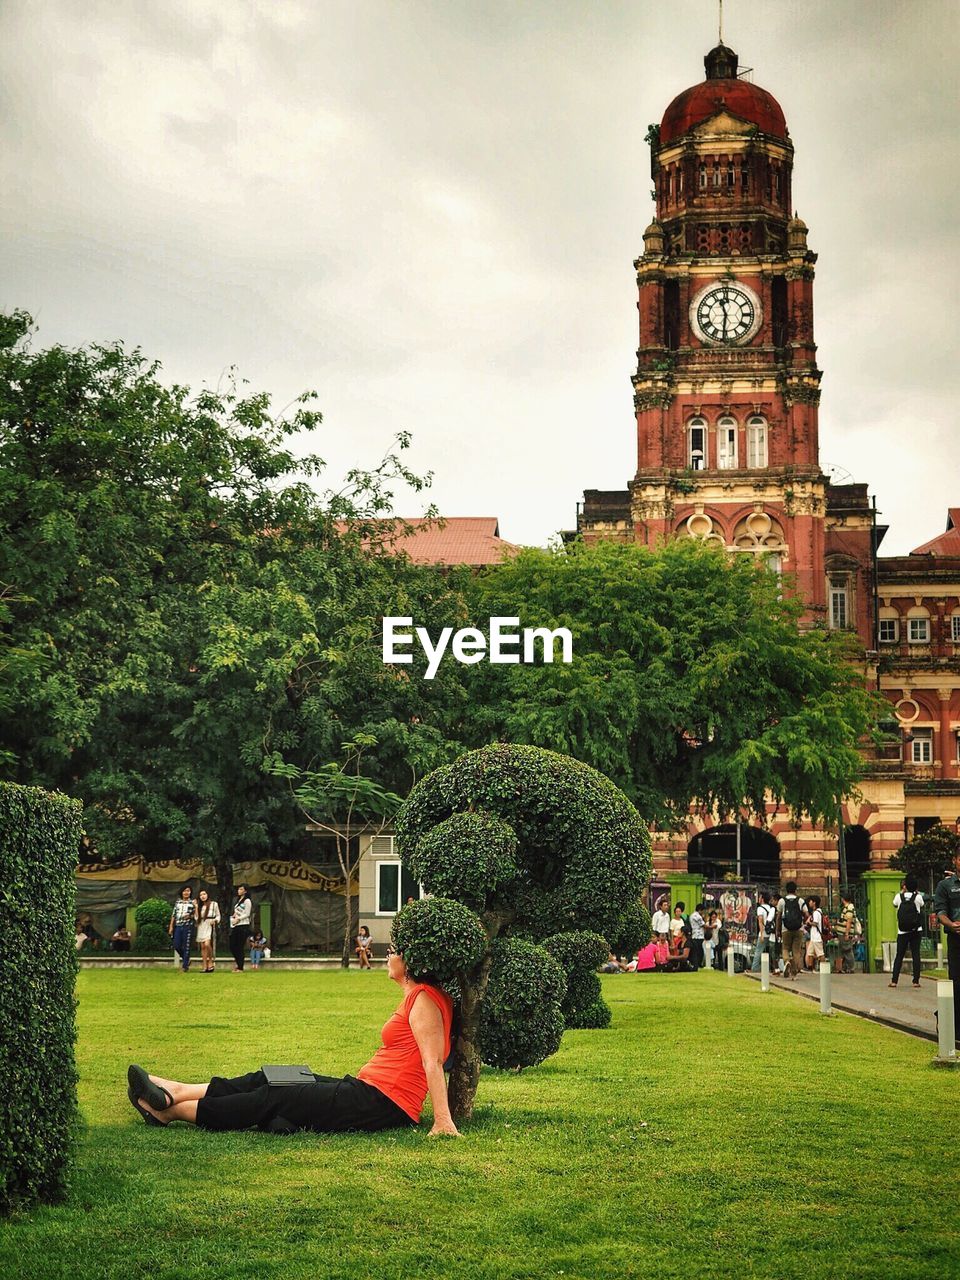 Woman sitting in garden by clock tower in city against cloudy sky